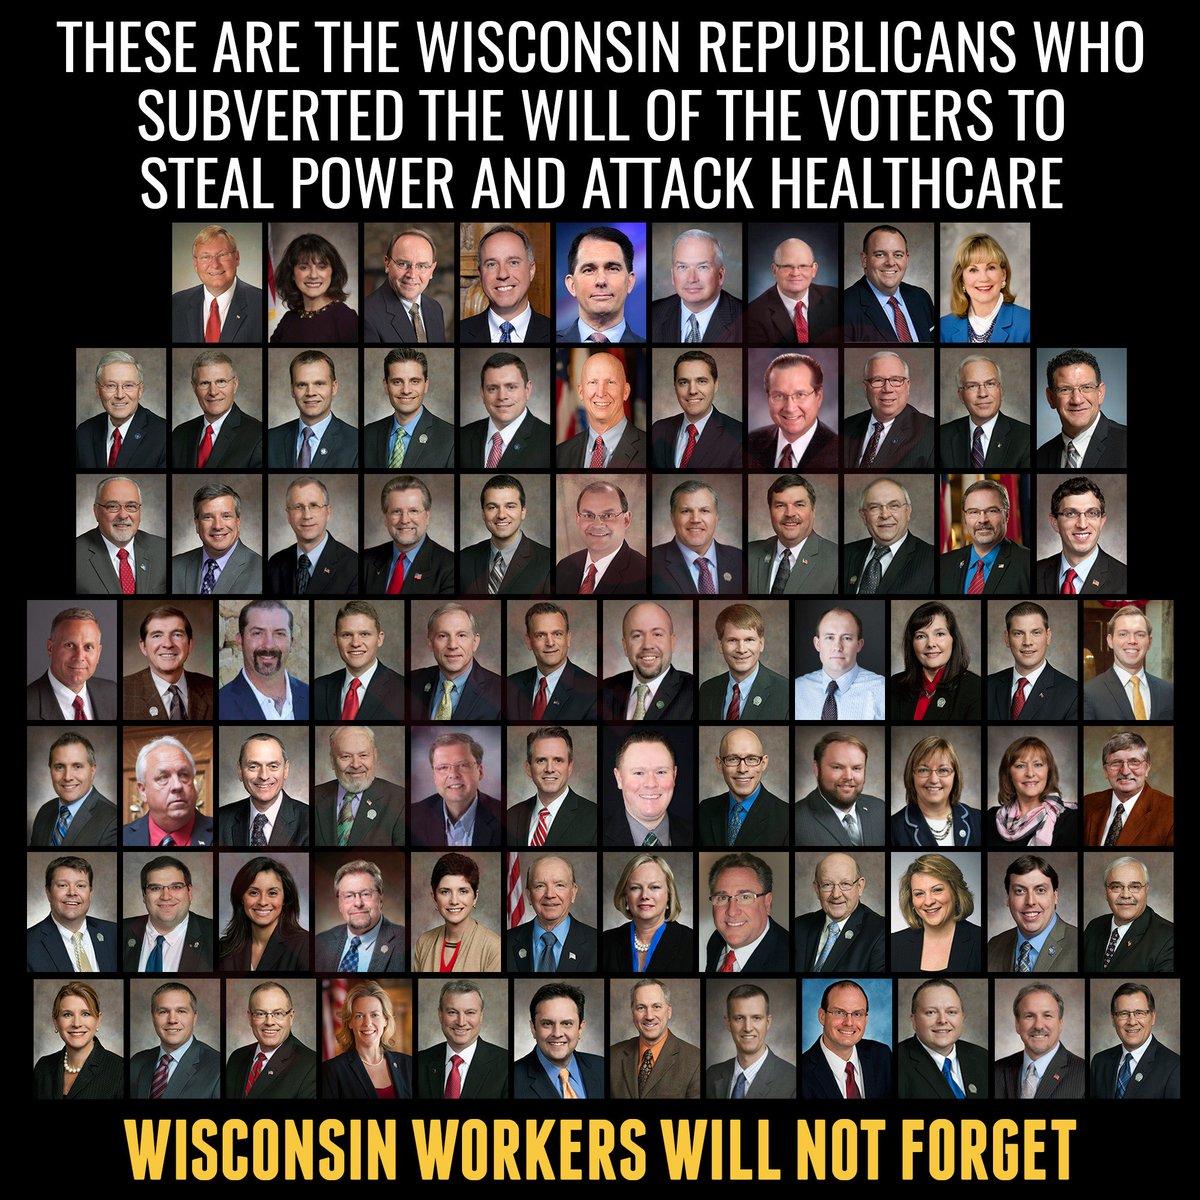 BREAKING: Scott Walker just signed the #WIPowerGrab bills with no vetoes, limiting the power of the incoming Dem. Governor and AG, while kicking people off of Medicaid. Workers will remember. #FightFor15

Votes 
Assembly: docs.legis.wisconsin.gov/2017/related/v…

Senate: docs.legis.wisconsin.gov/2017/related/v…